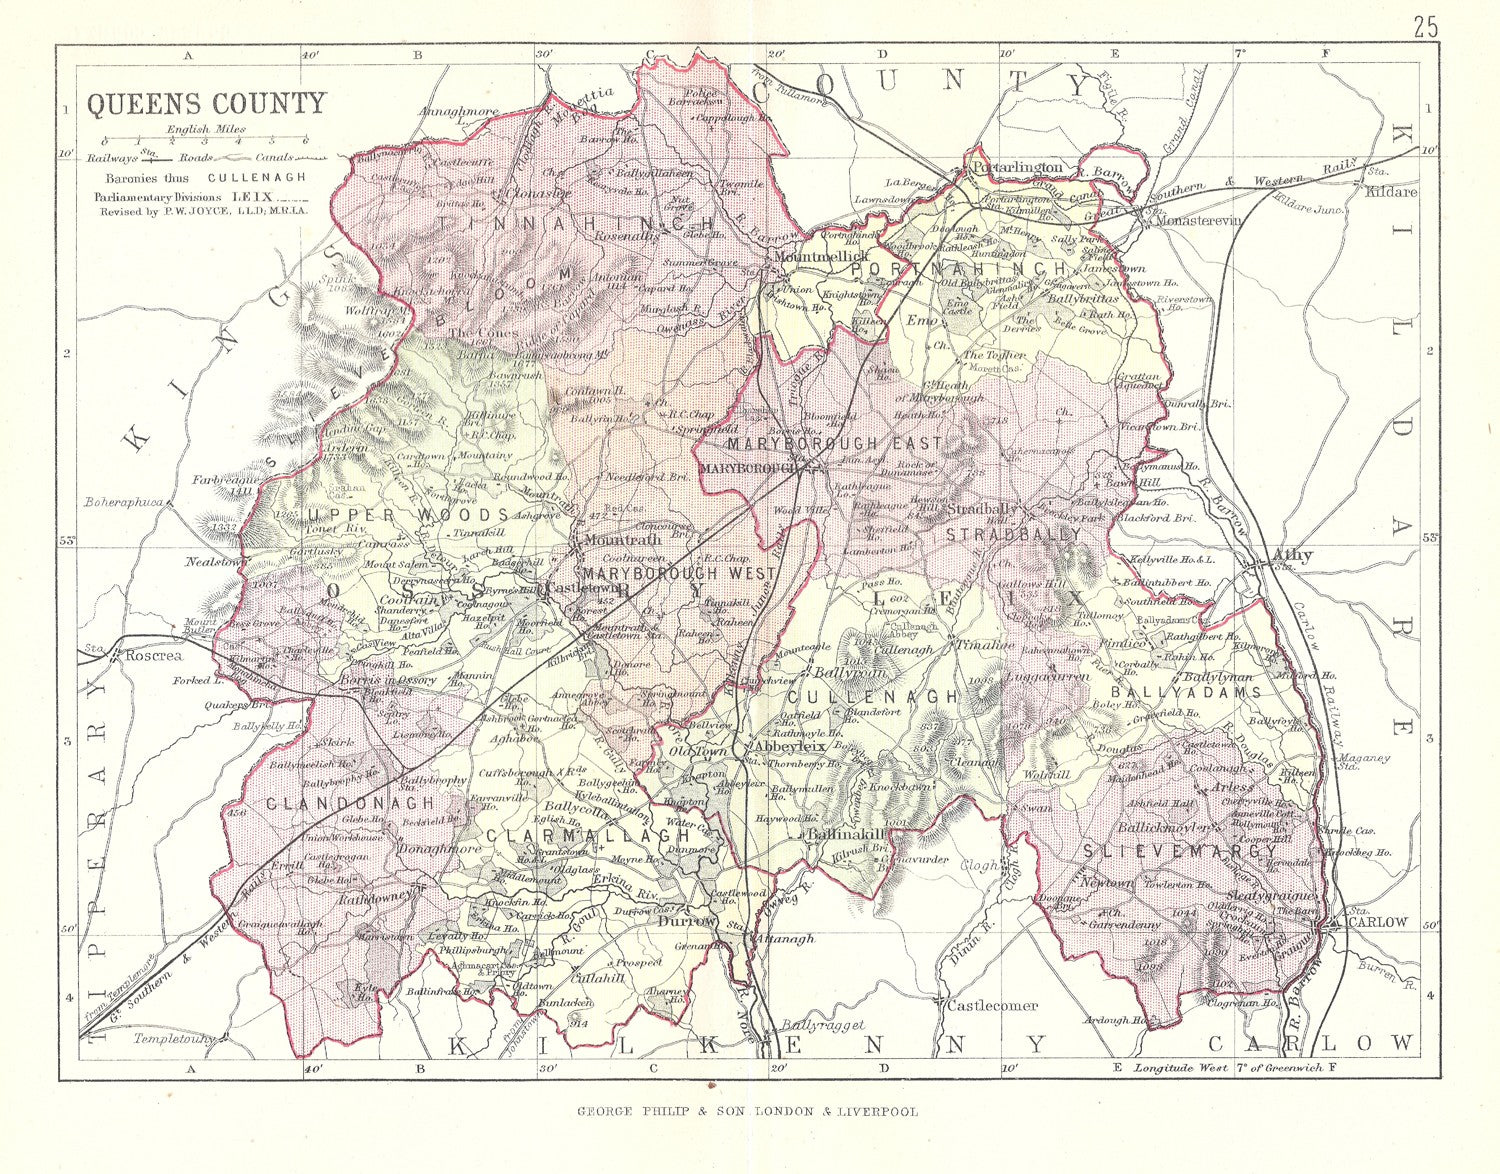 Queens County (Laois) Ireland antique map – Maps and Antique Prints